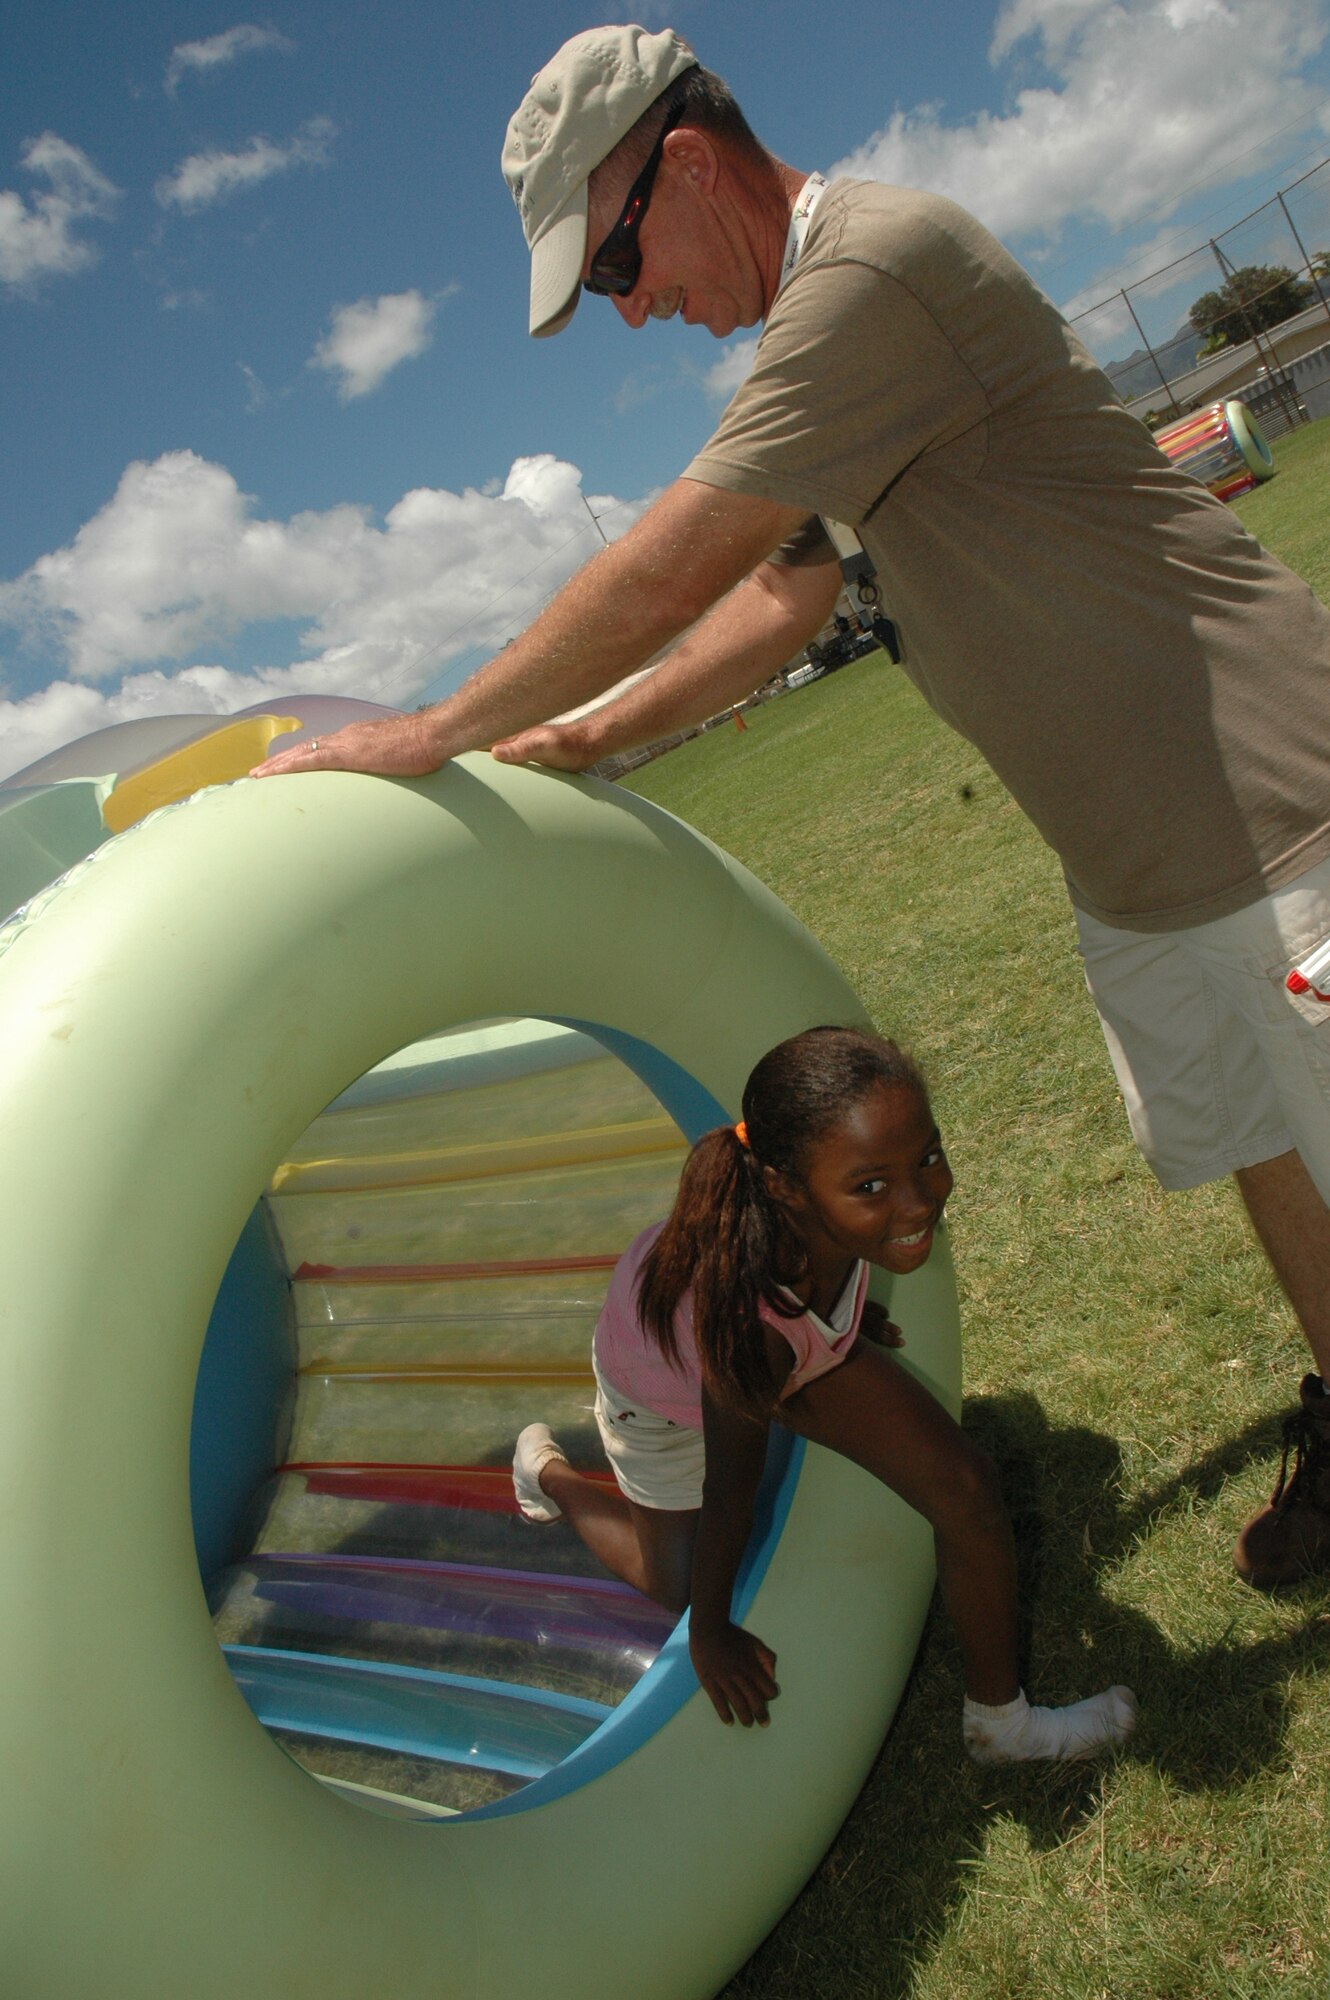 Tech. Sgt. Robert Brown, 624th Civil Engineer Squadron, helps Alexa out of the Giant Hamster Wheel at Makalapa Elementary School's Field Day, May 28-29. 624th CES is a part of the 624th Regional Support Group, Hickam Air Force Base, Hawaii. The 624th RSG has been involved with Makalapa since 2004 as part of the Hickam School Partnership program. (U.S. Air Force photo/Master Sgt. Daniel Nathaniel)